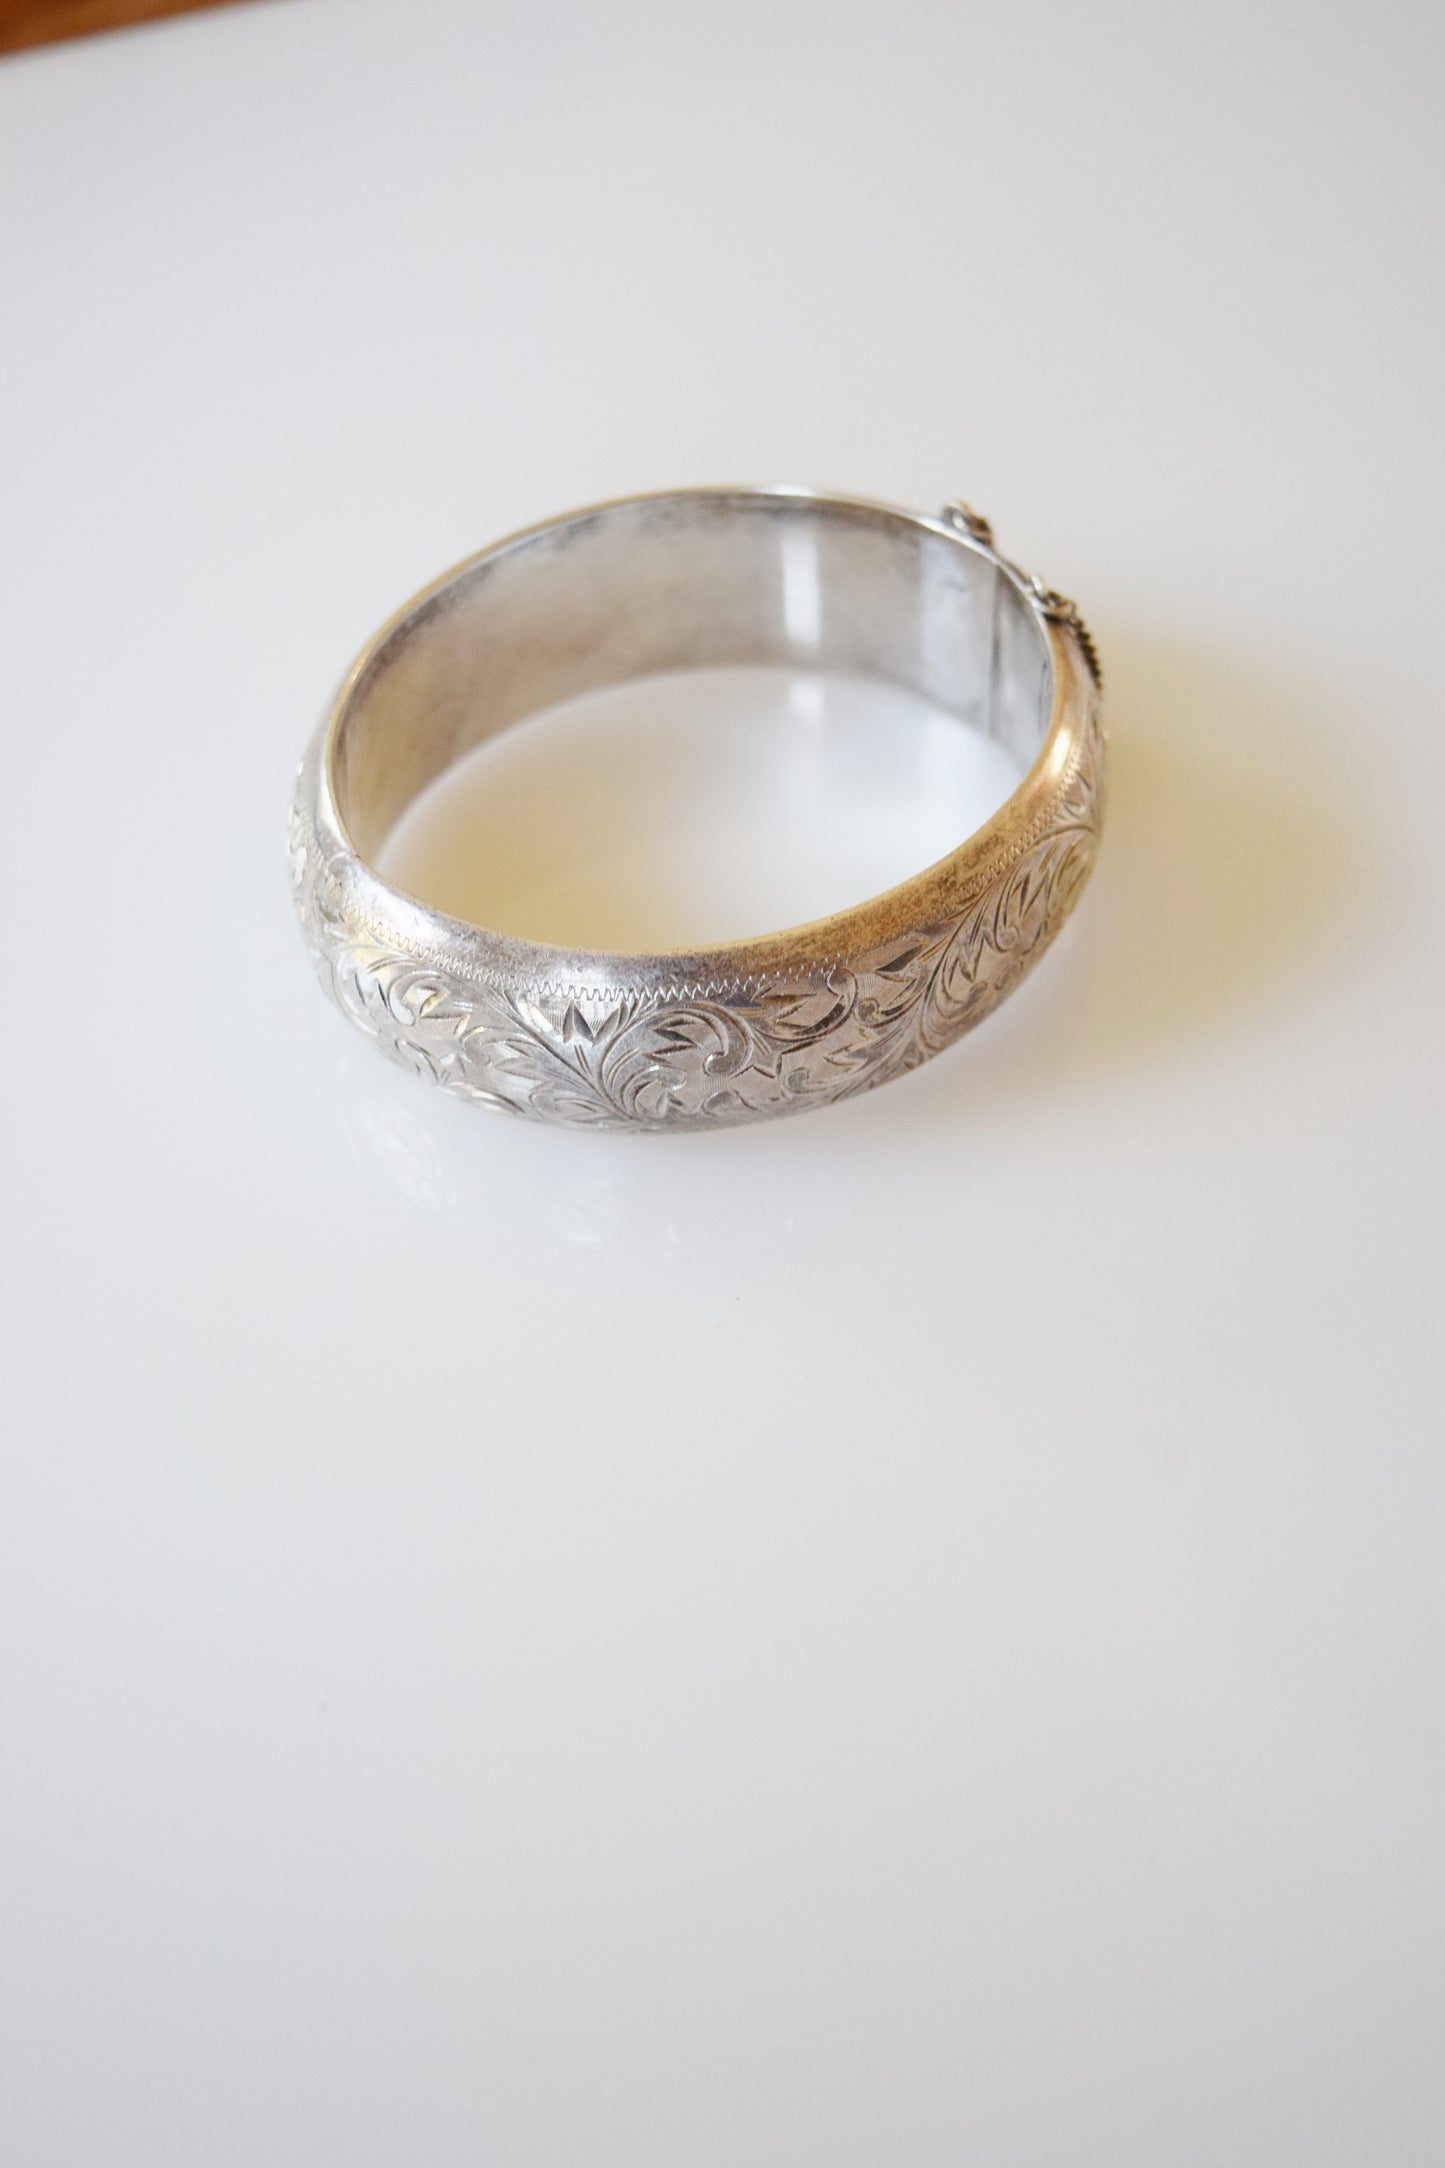 Etched Victorian Revival Sterling Silver Bangle